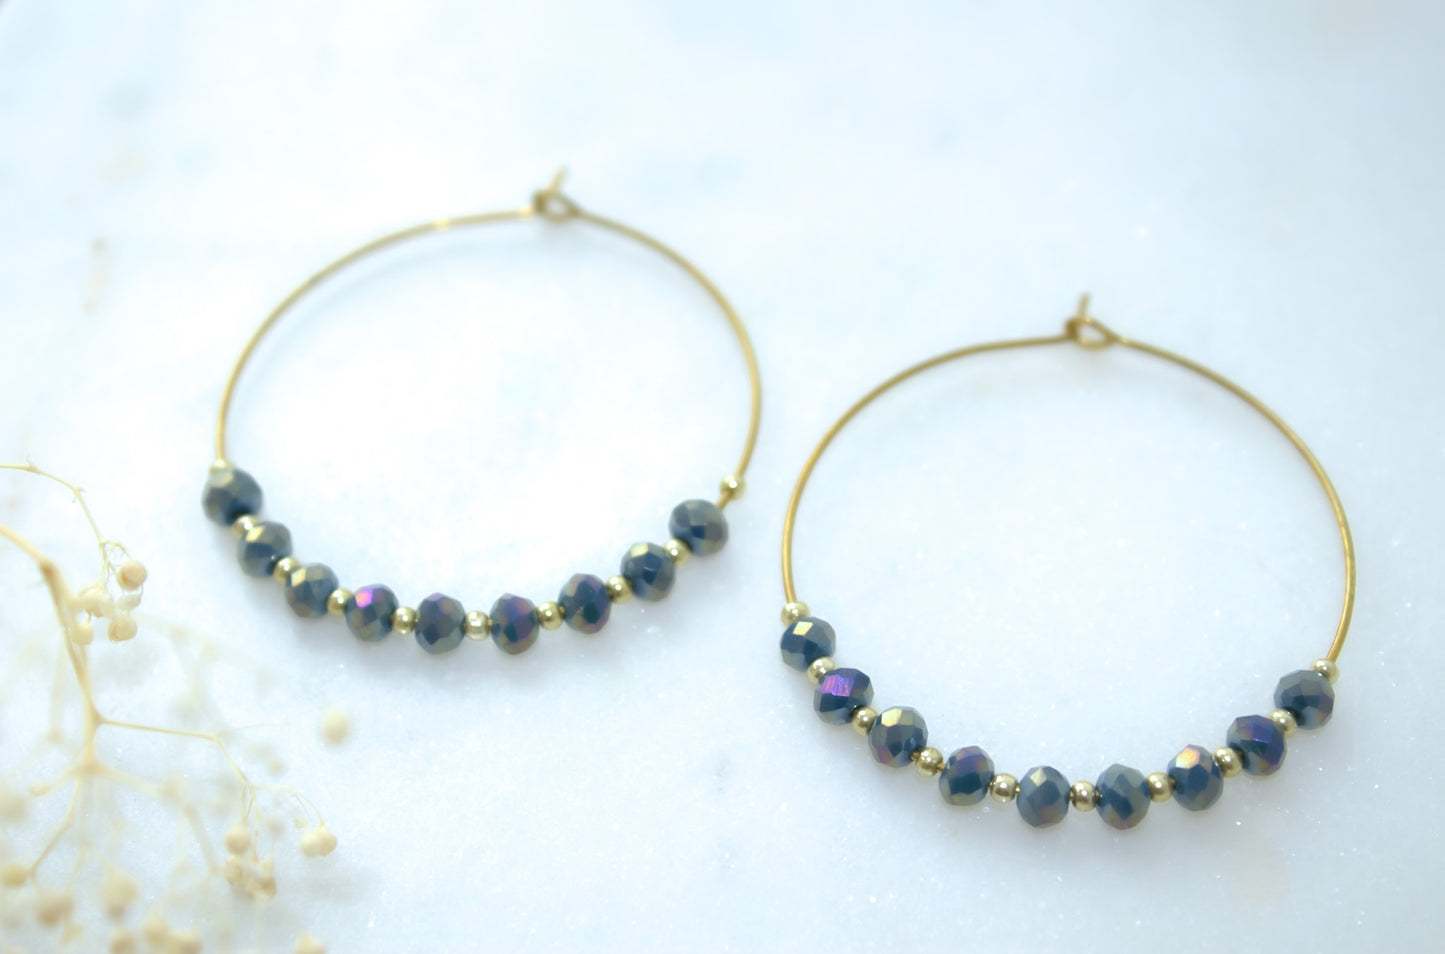 Simple Beaded Hoops in Gold and Iridescent Steel Blue